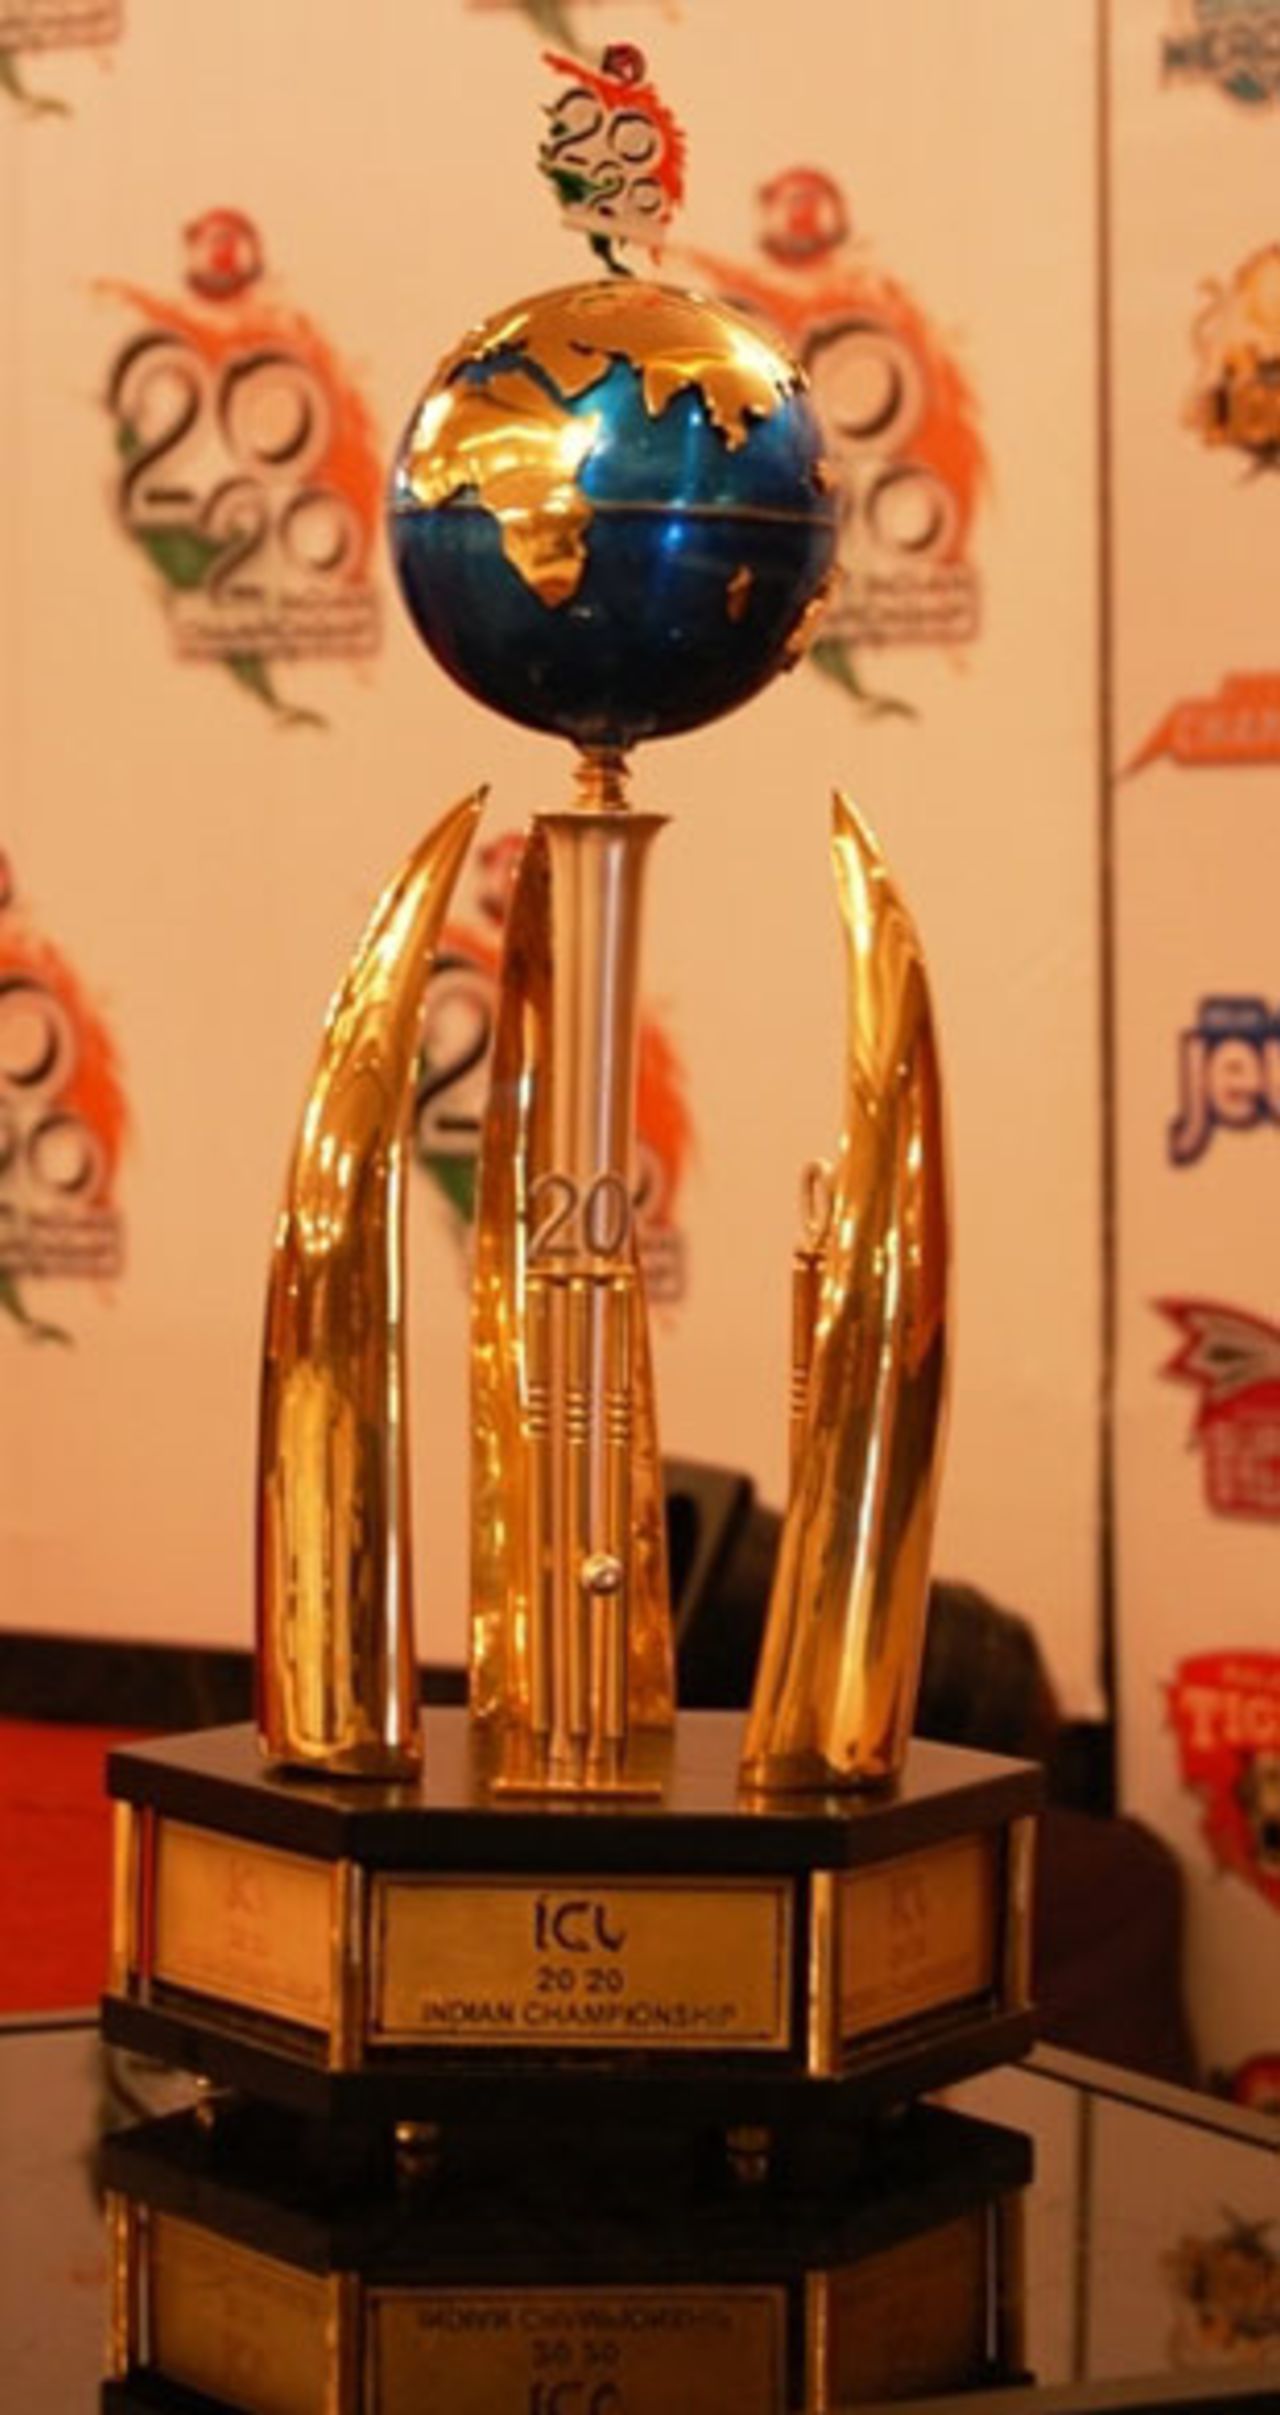 The trophy, that the Indian Cricket League (ICL) 20-20 Indian Championship is being played for, is unveiled at a function in Chandigarh, ICL 20-20 Indian Championship, Panchkula, November 30, 2007 